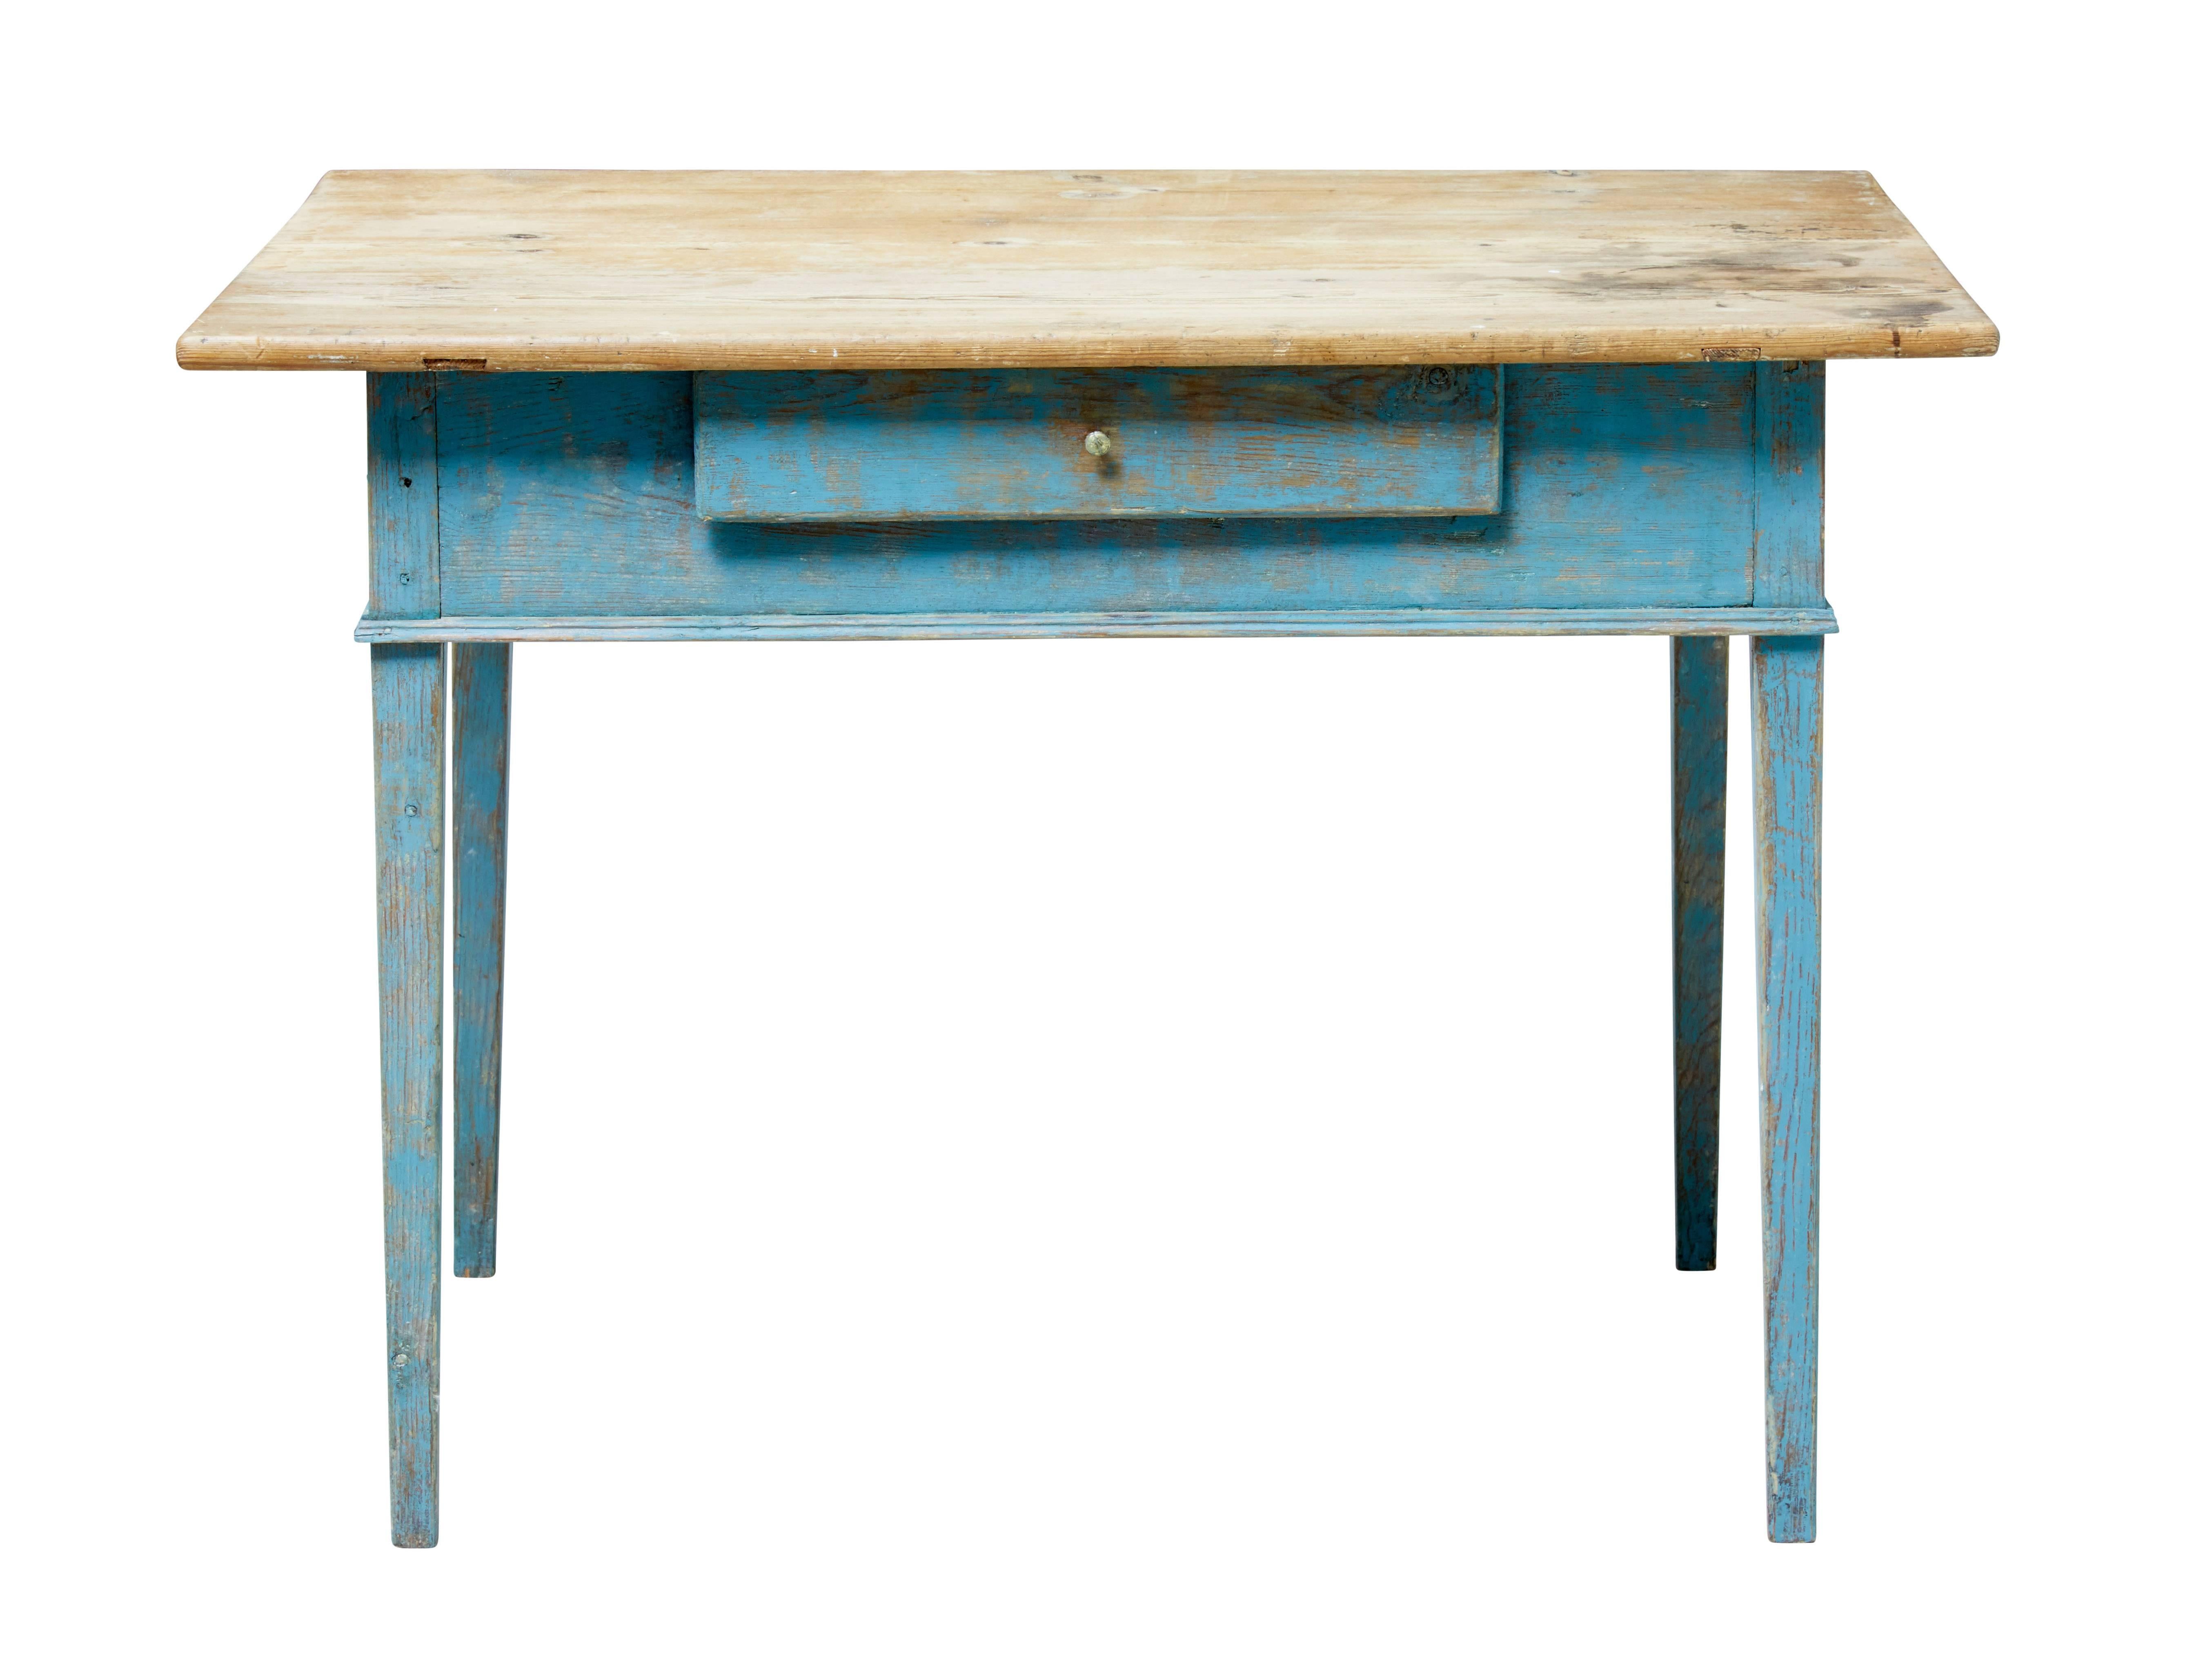 Rustic Swedish pine kitchen table, circa 1870.

Originally made as a kitchen table but also lends itself as a desk / work station.

Scrubbed pine top which is in original condition with surface staining, below which a painted base in contrasting